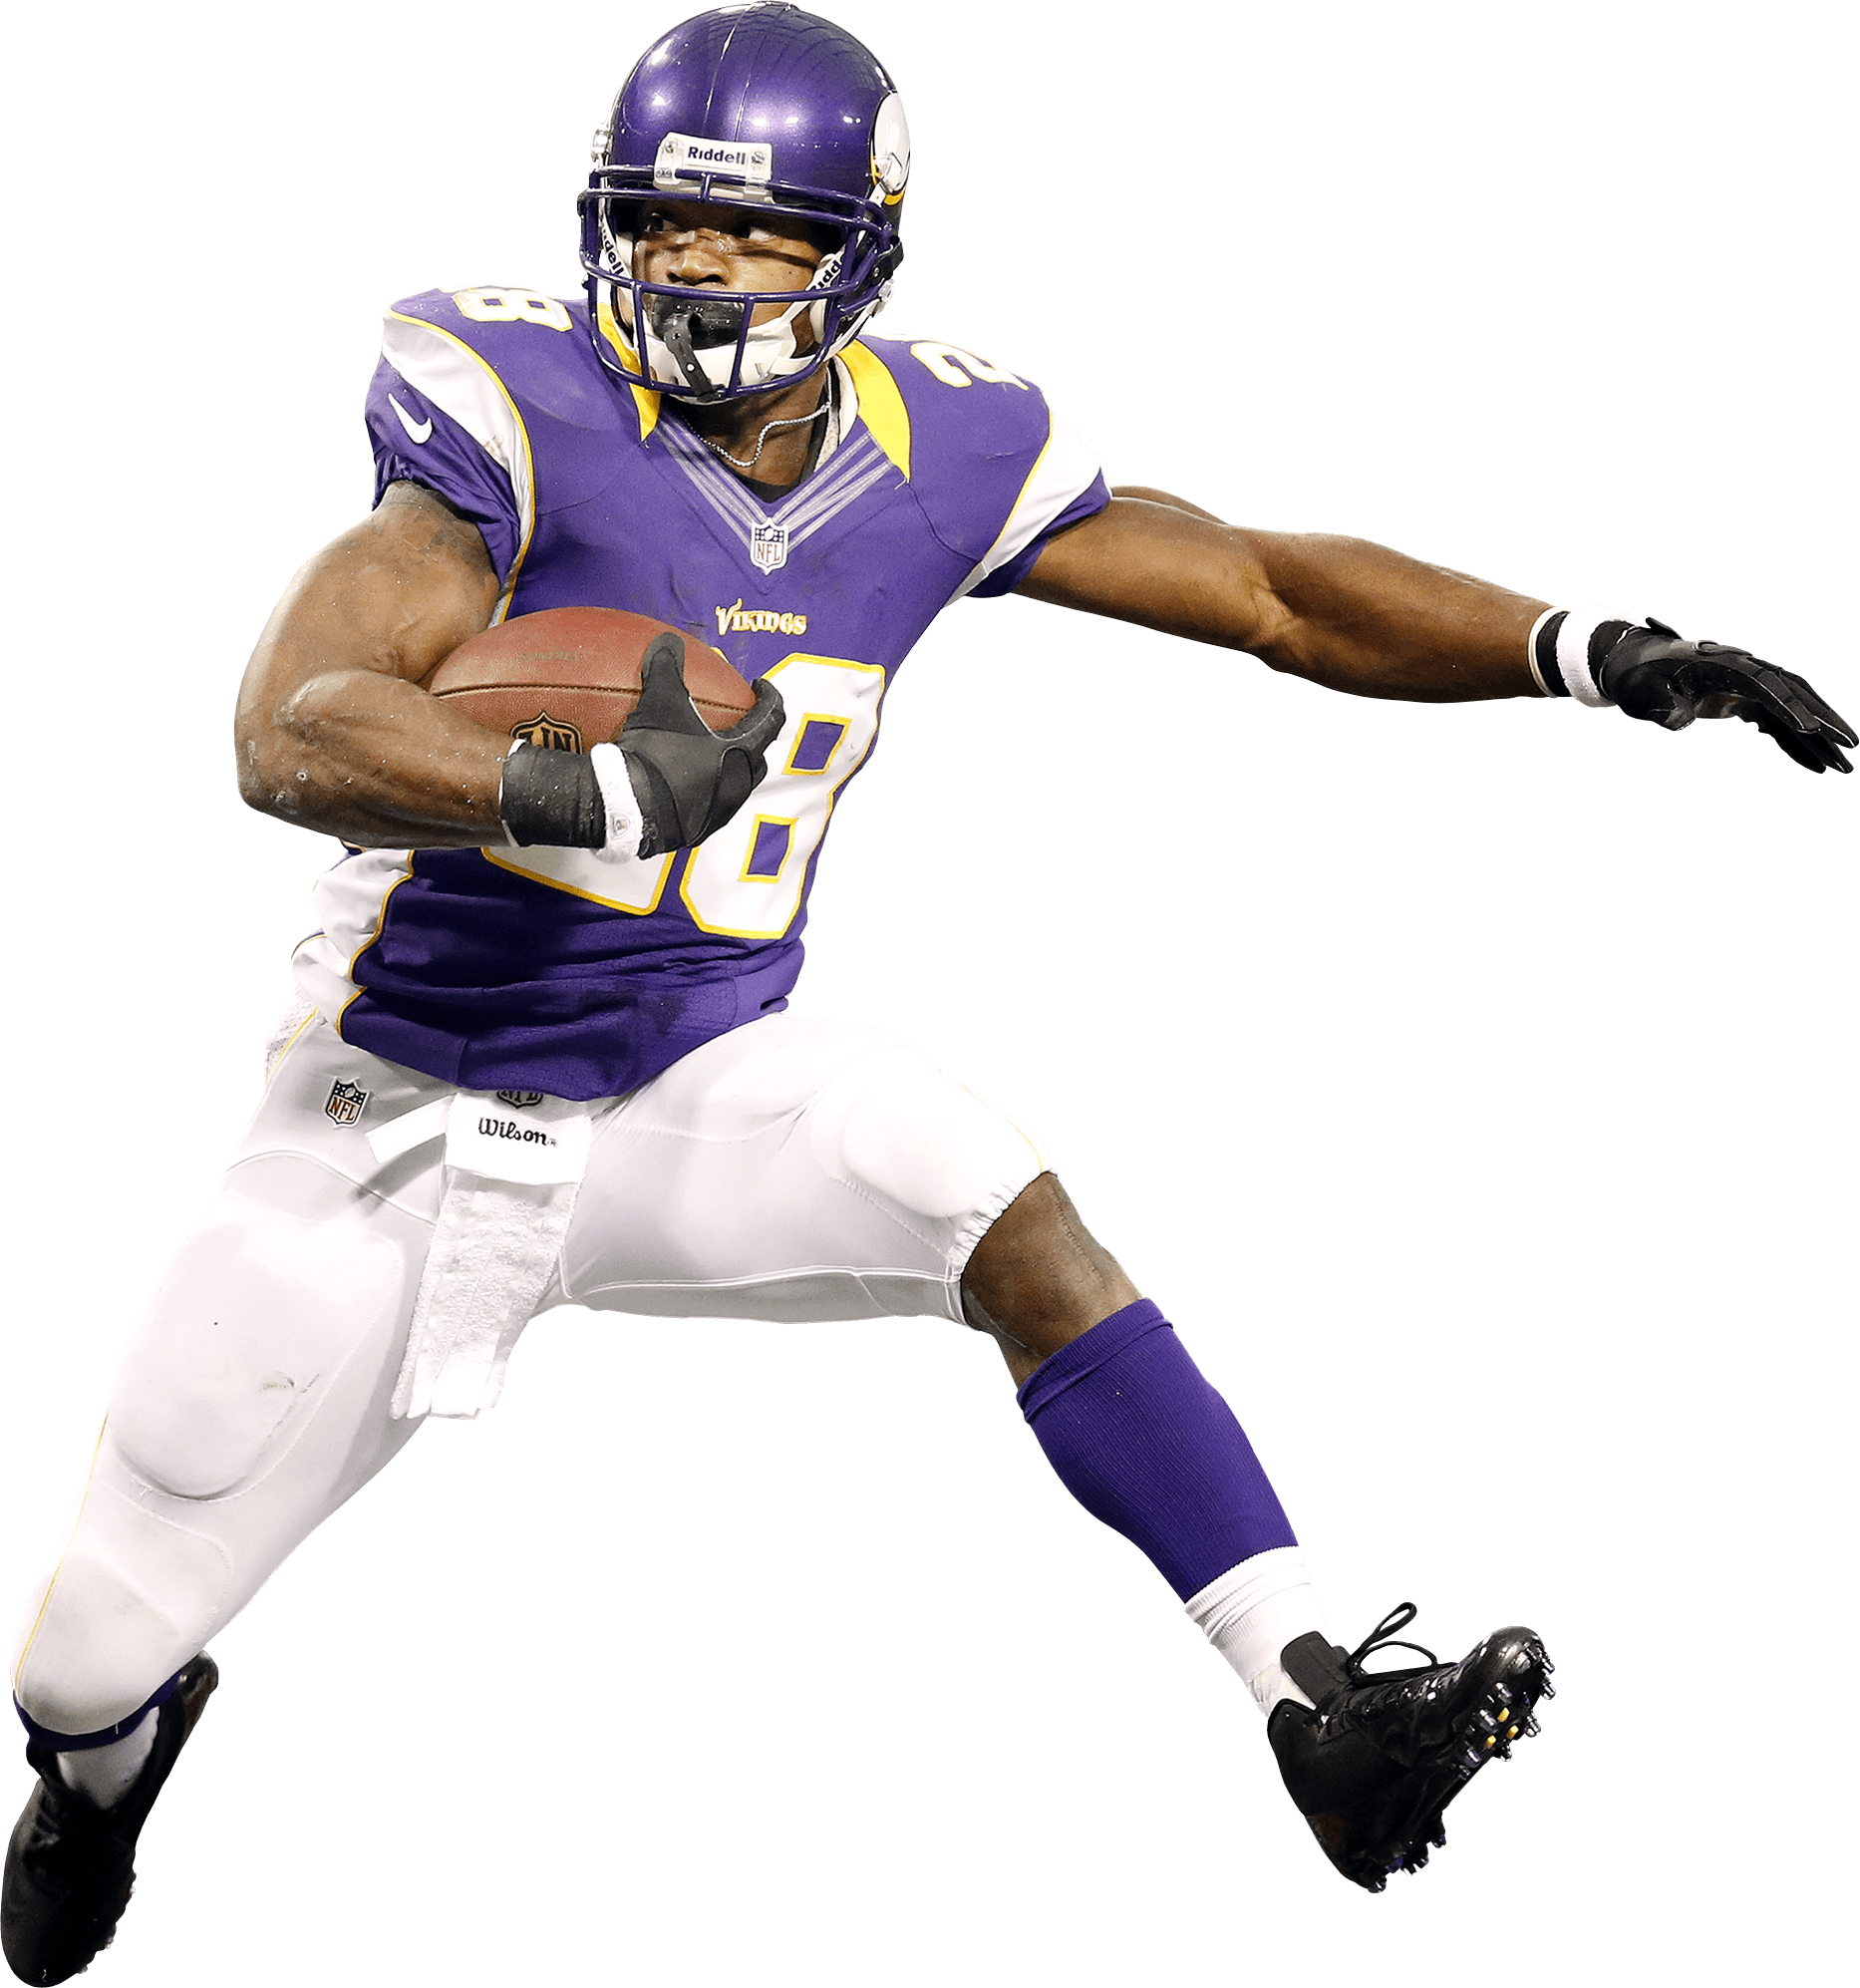 A Football Player In A Purple Uniform Holding A Football